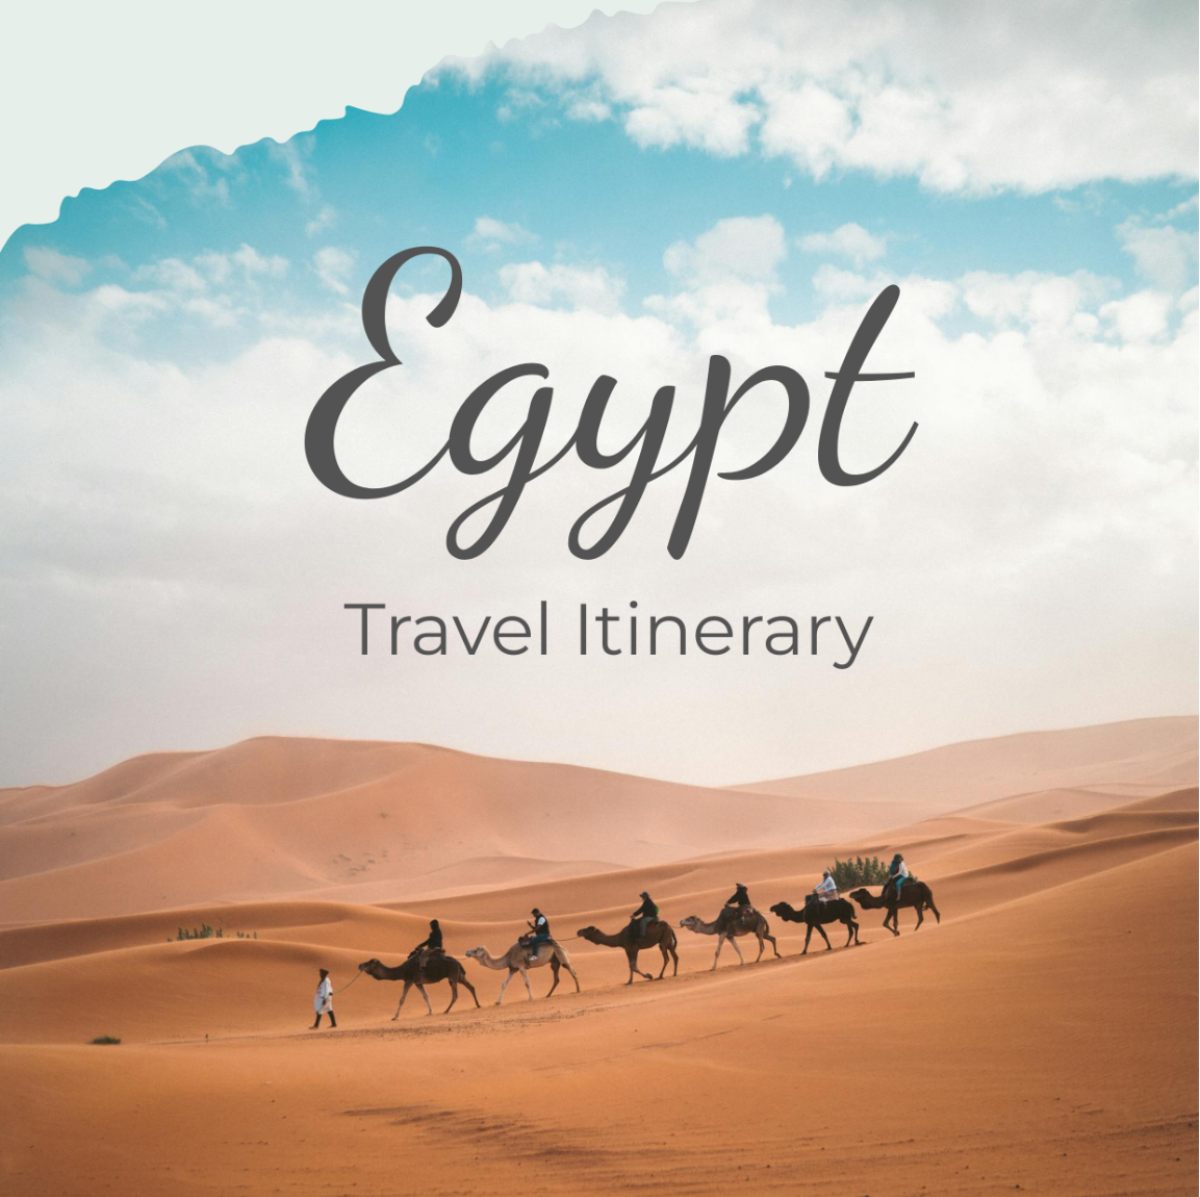 Egypt Travel Itinerary Template